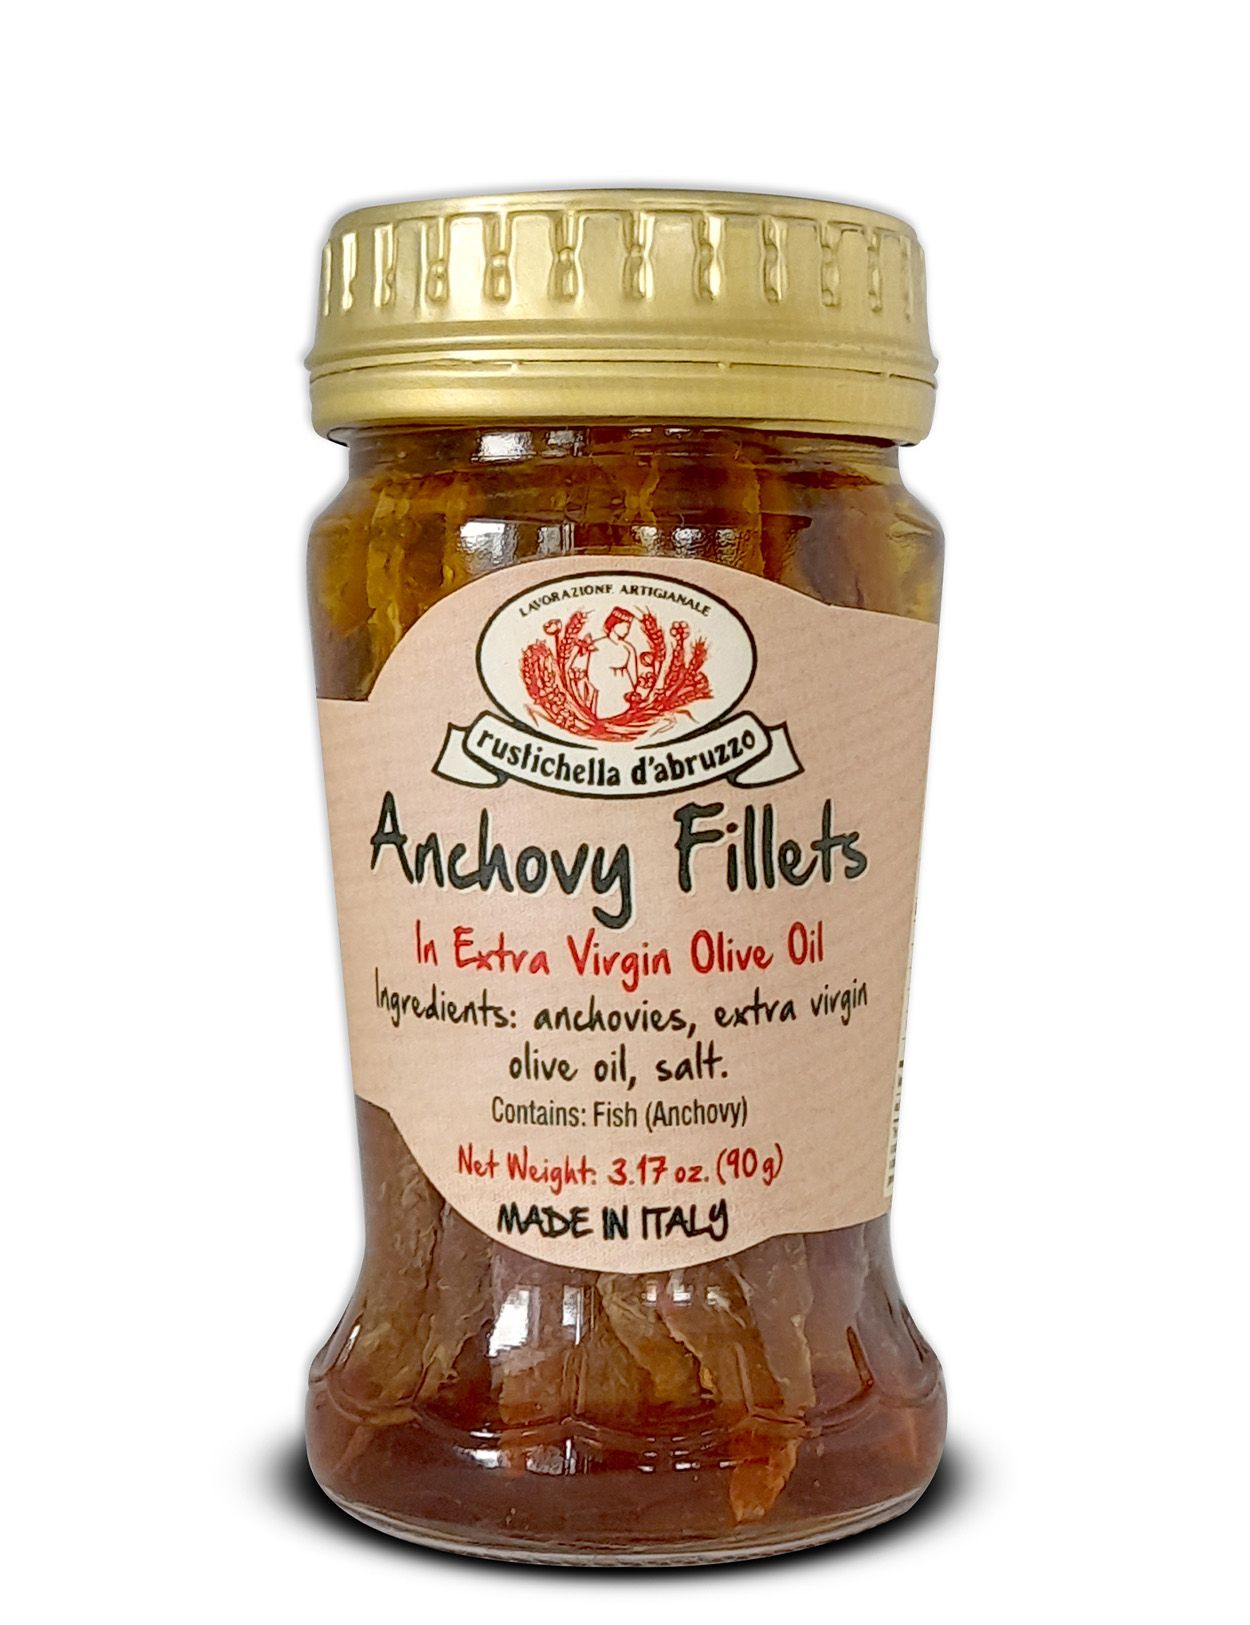 Anchovy Fillets in Extra Virgin Olive Oil